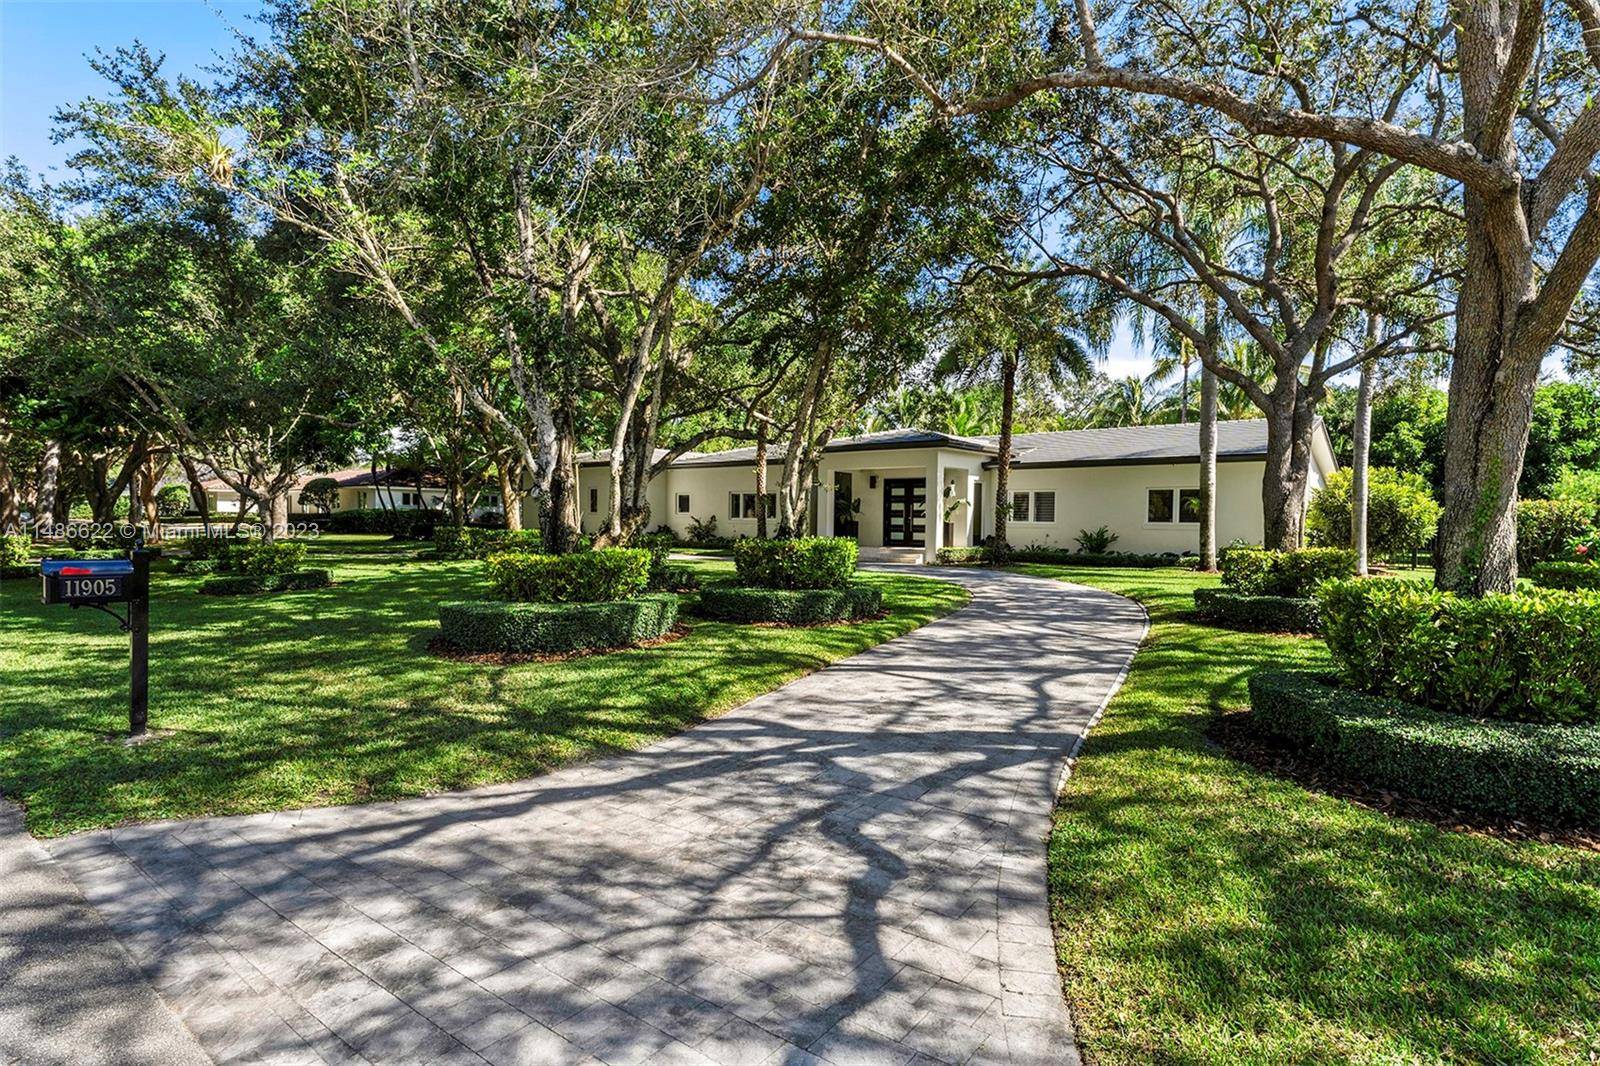 Exquisitely renovated to perfection in 2015, this residence has lofty ceilings throughout the home.